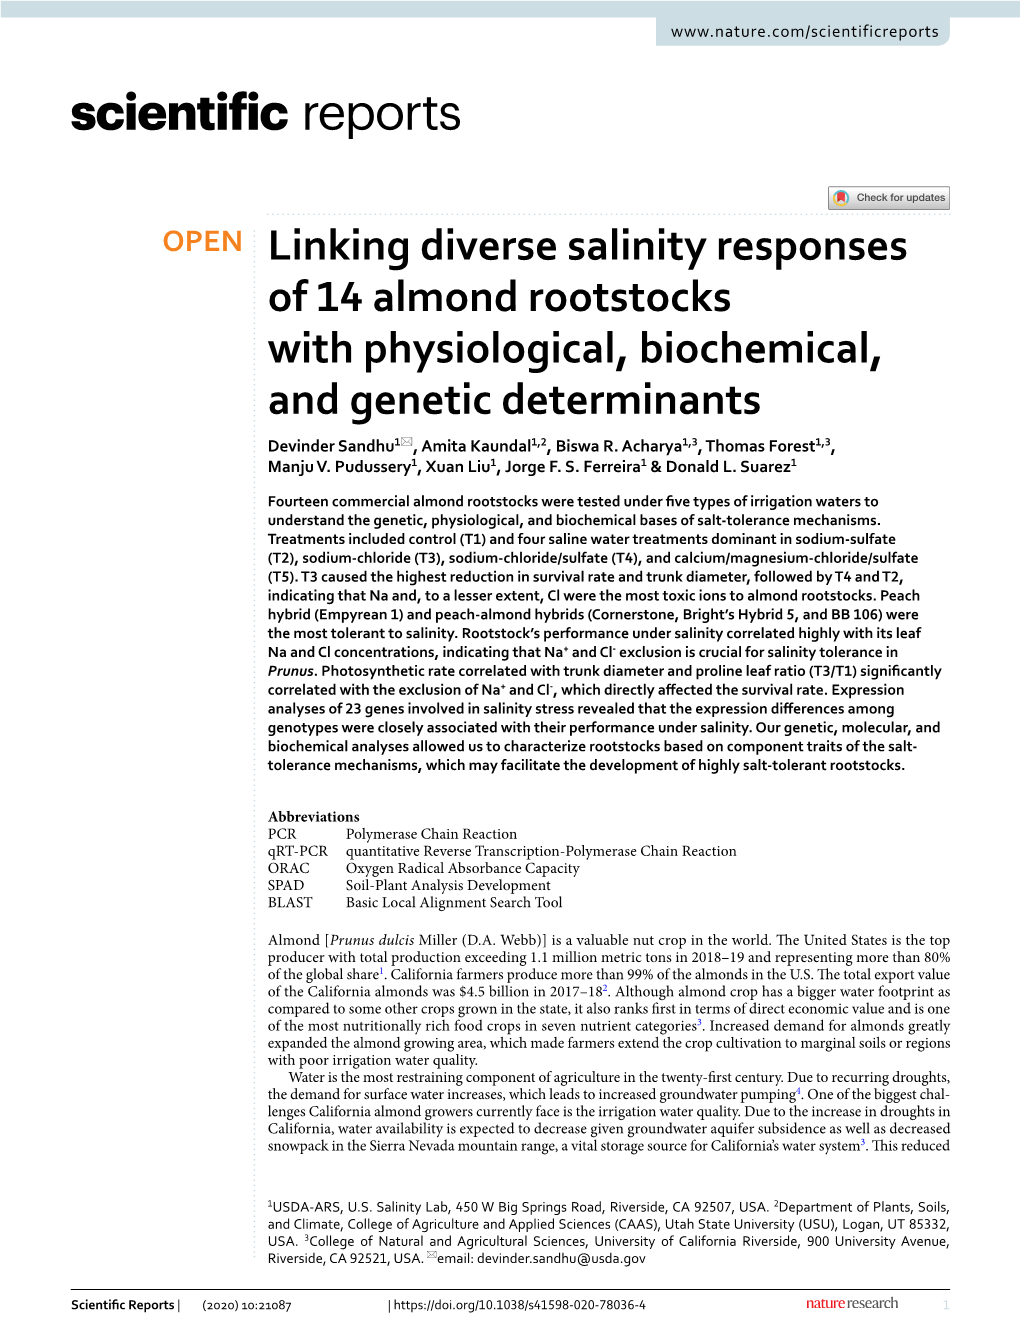 Linking Diverse Salinity Responses of 14 Almond Rootstocks with Physiological, Biochemical, and Genetic Determinants Devinder Sandhu1*, Amita Kaundal1,2, Biswa R